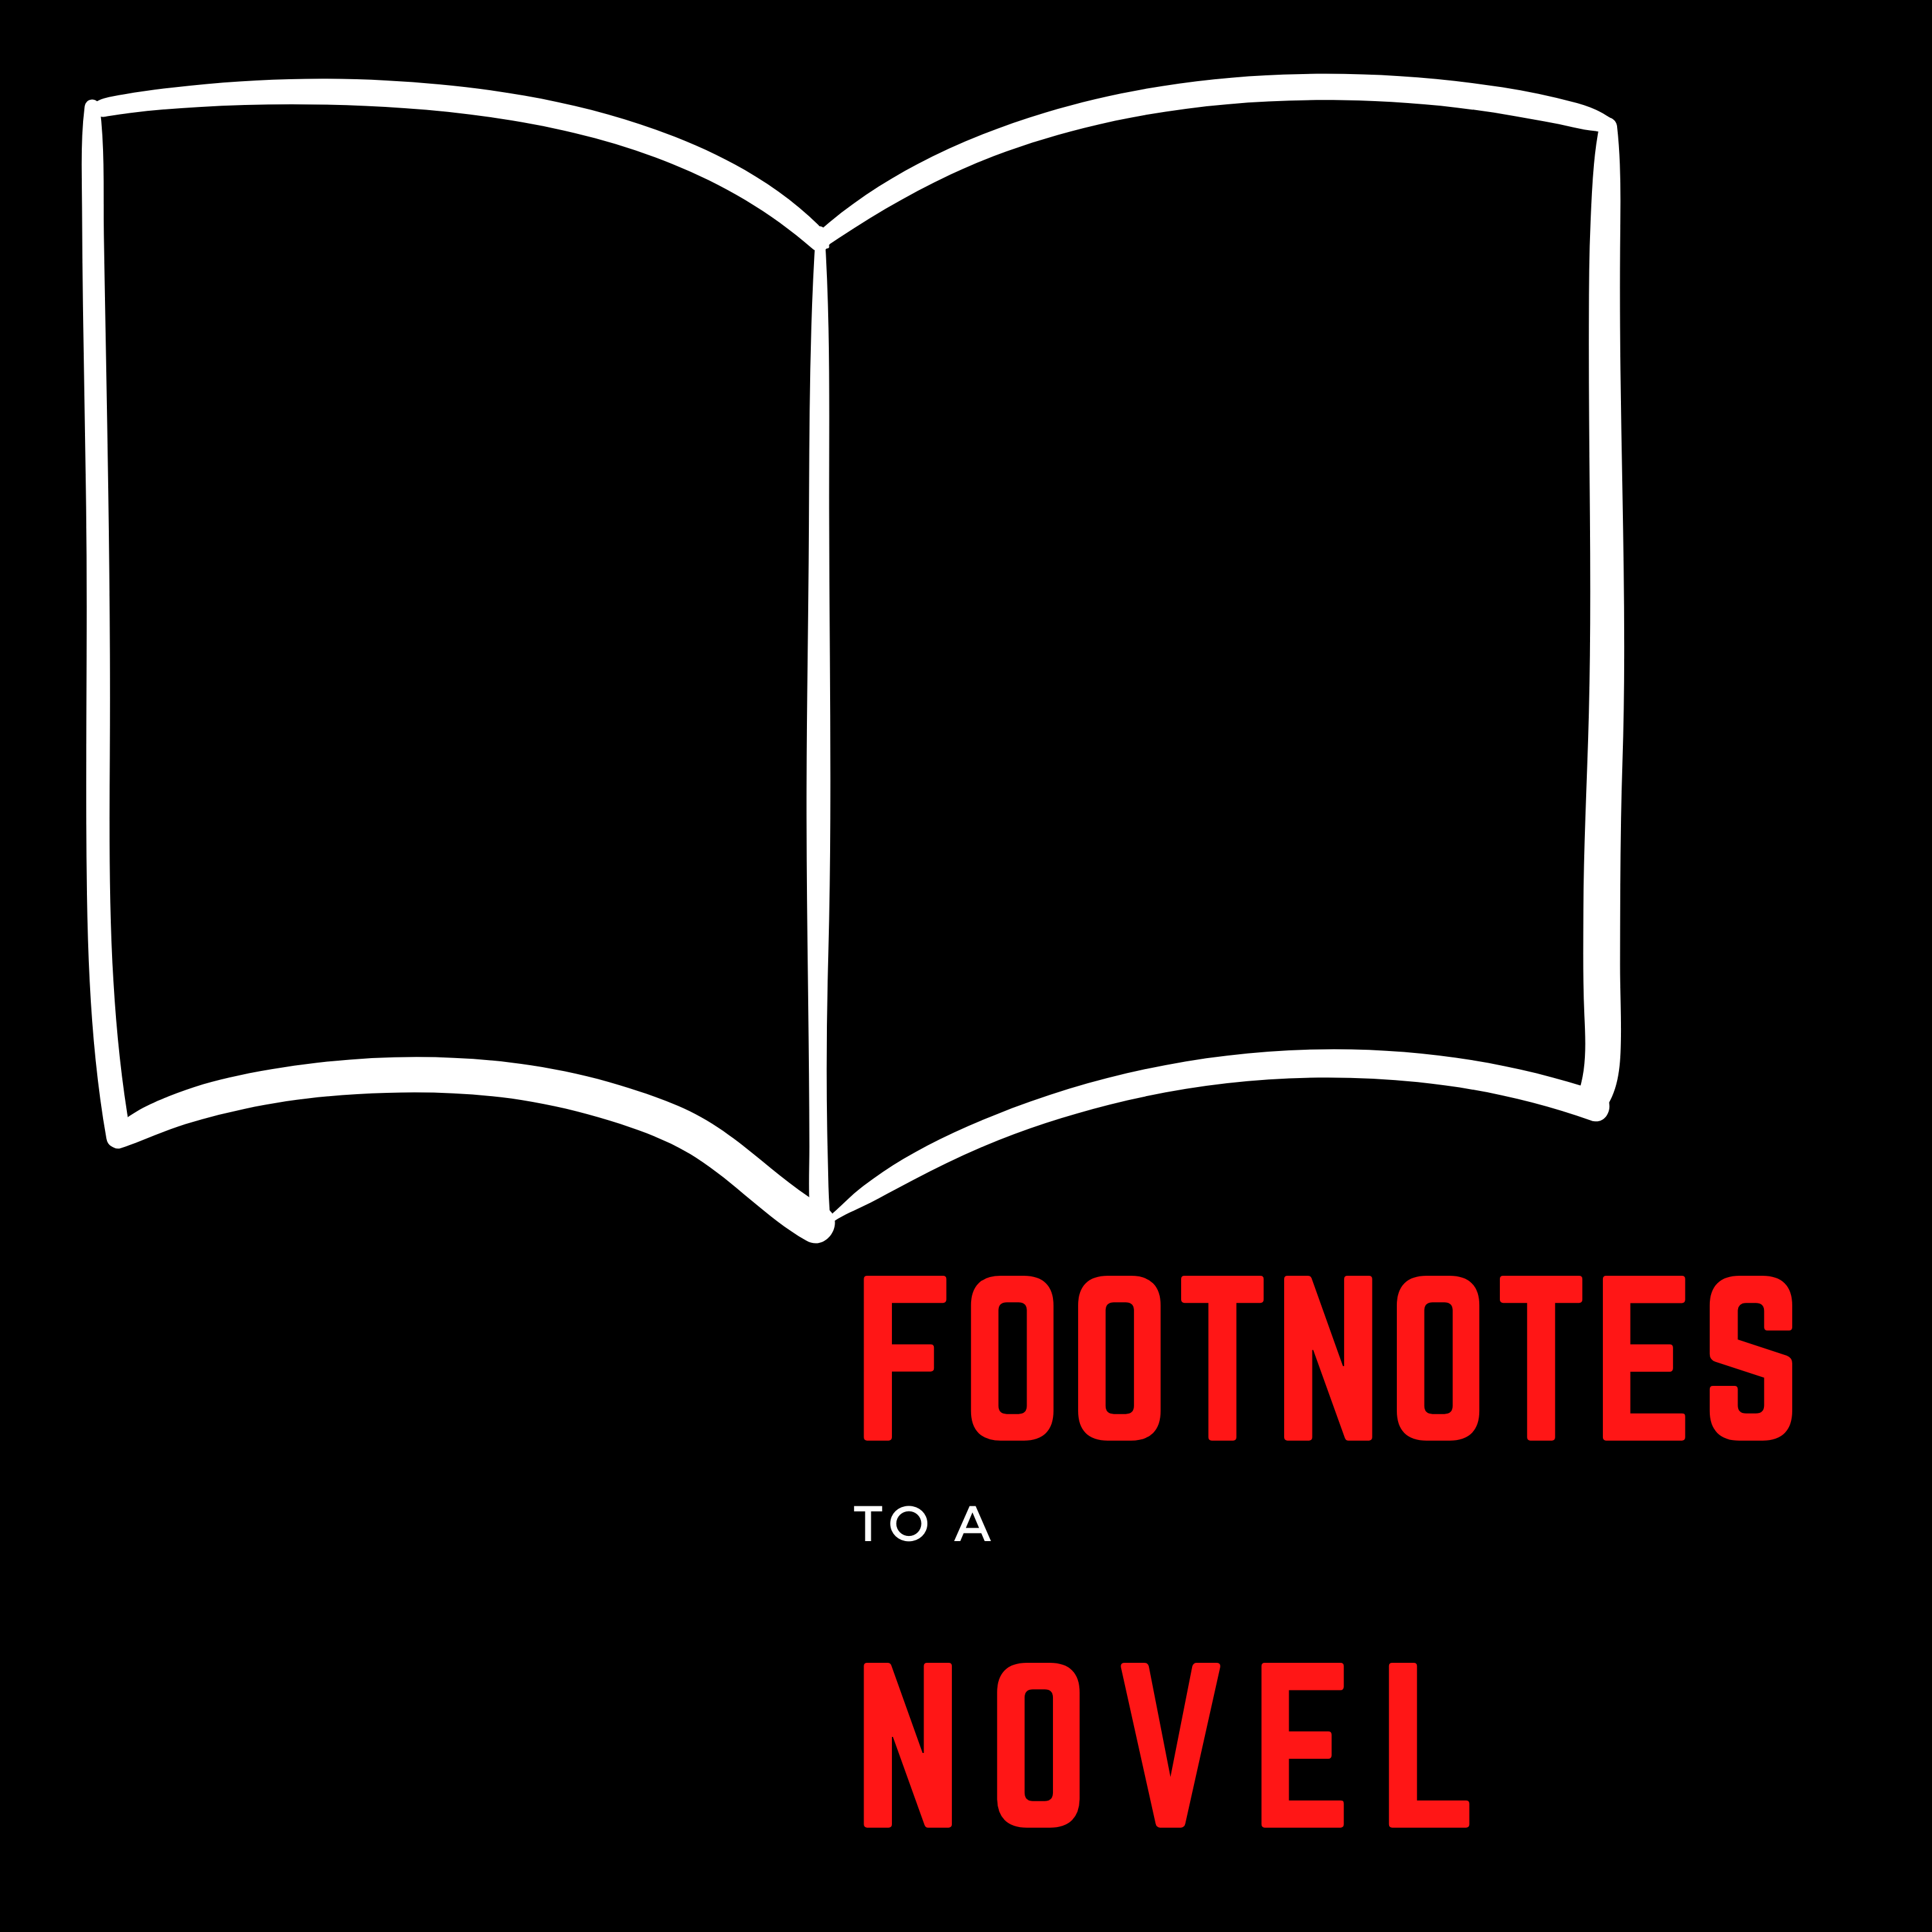 Footnotes to a Novel